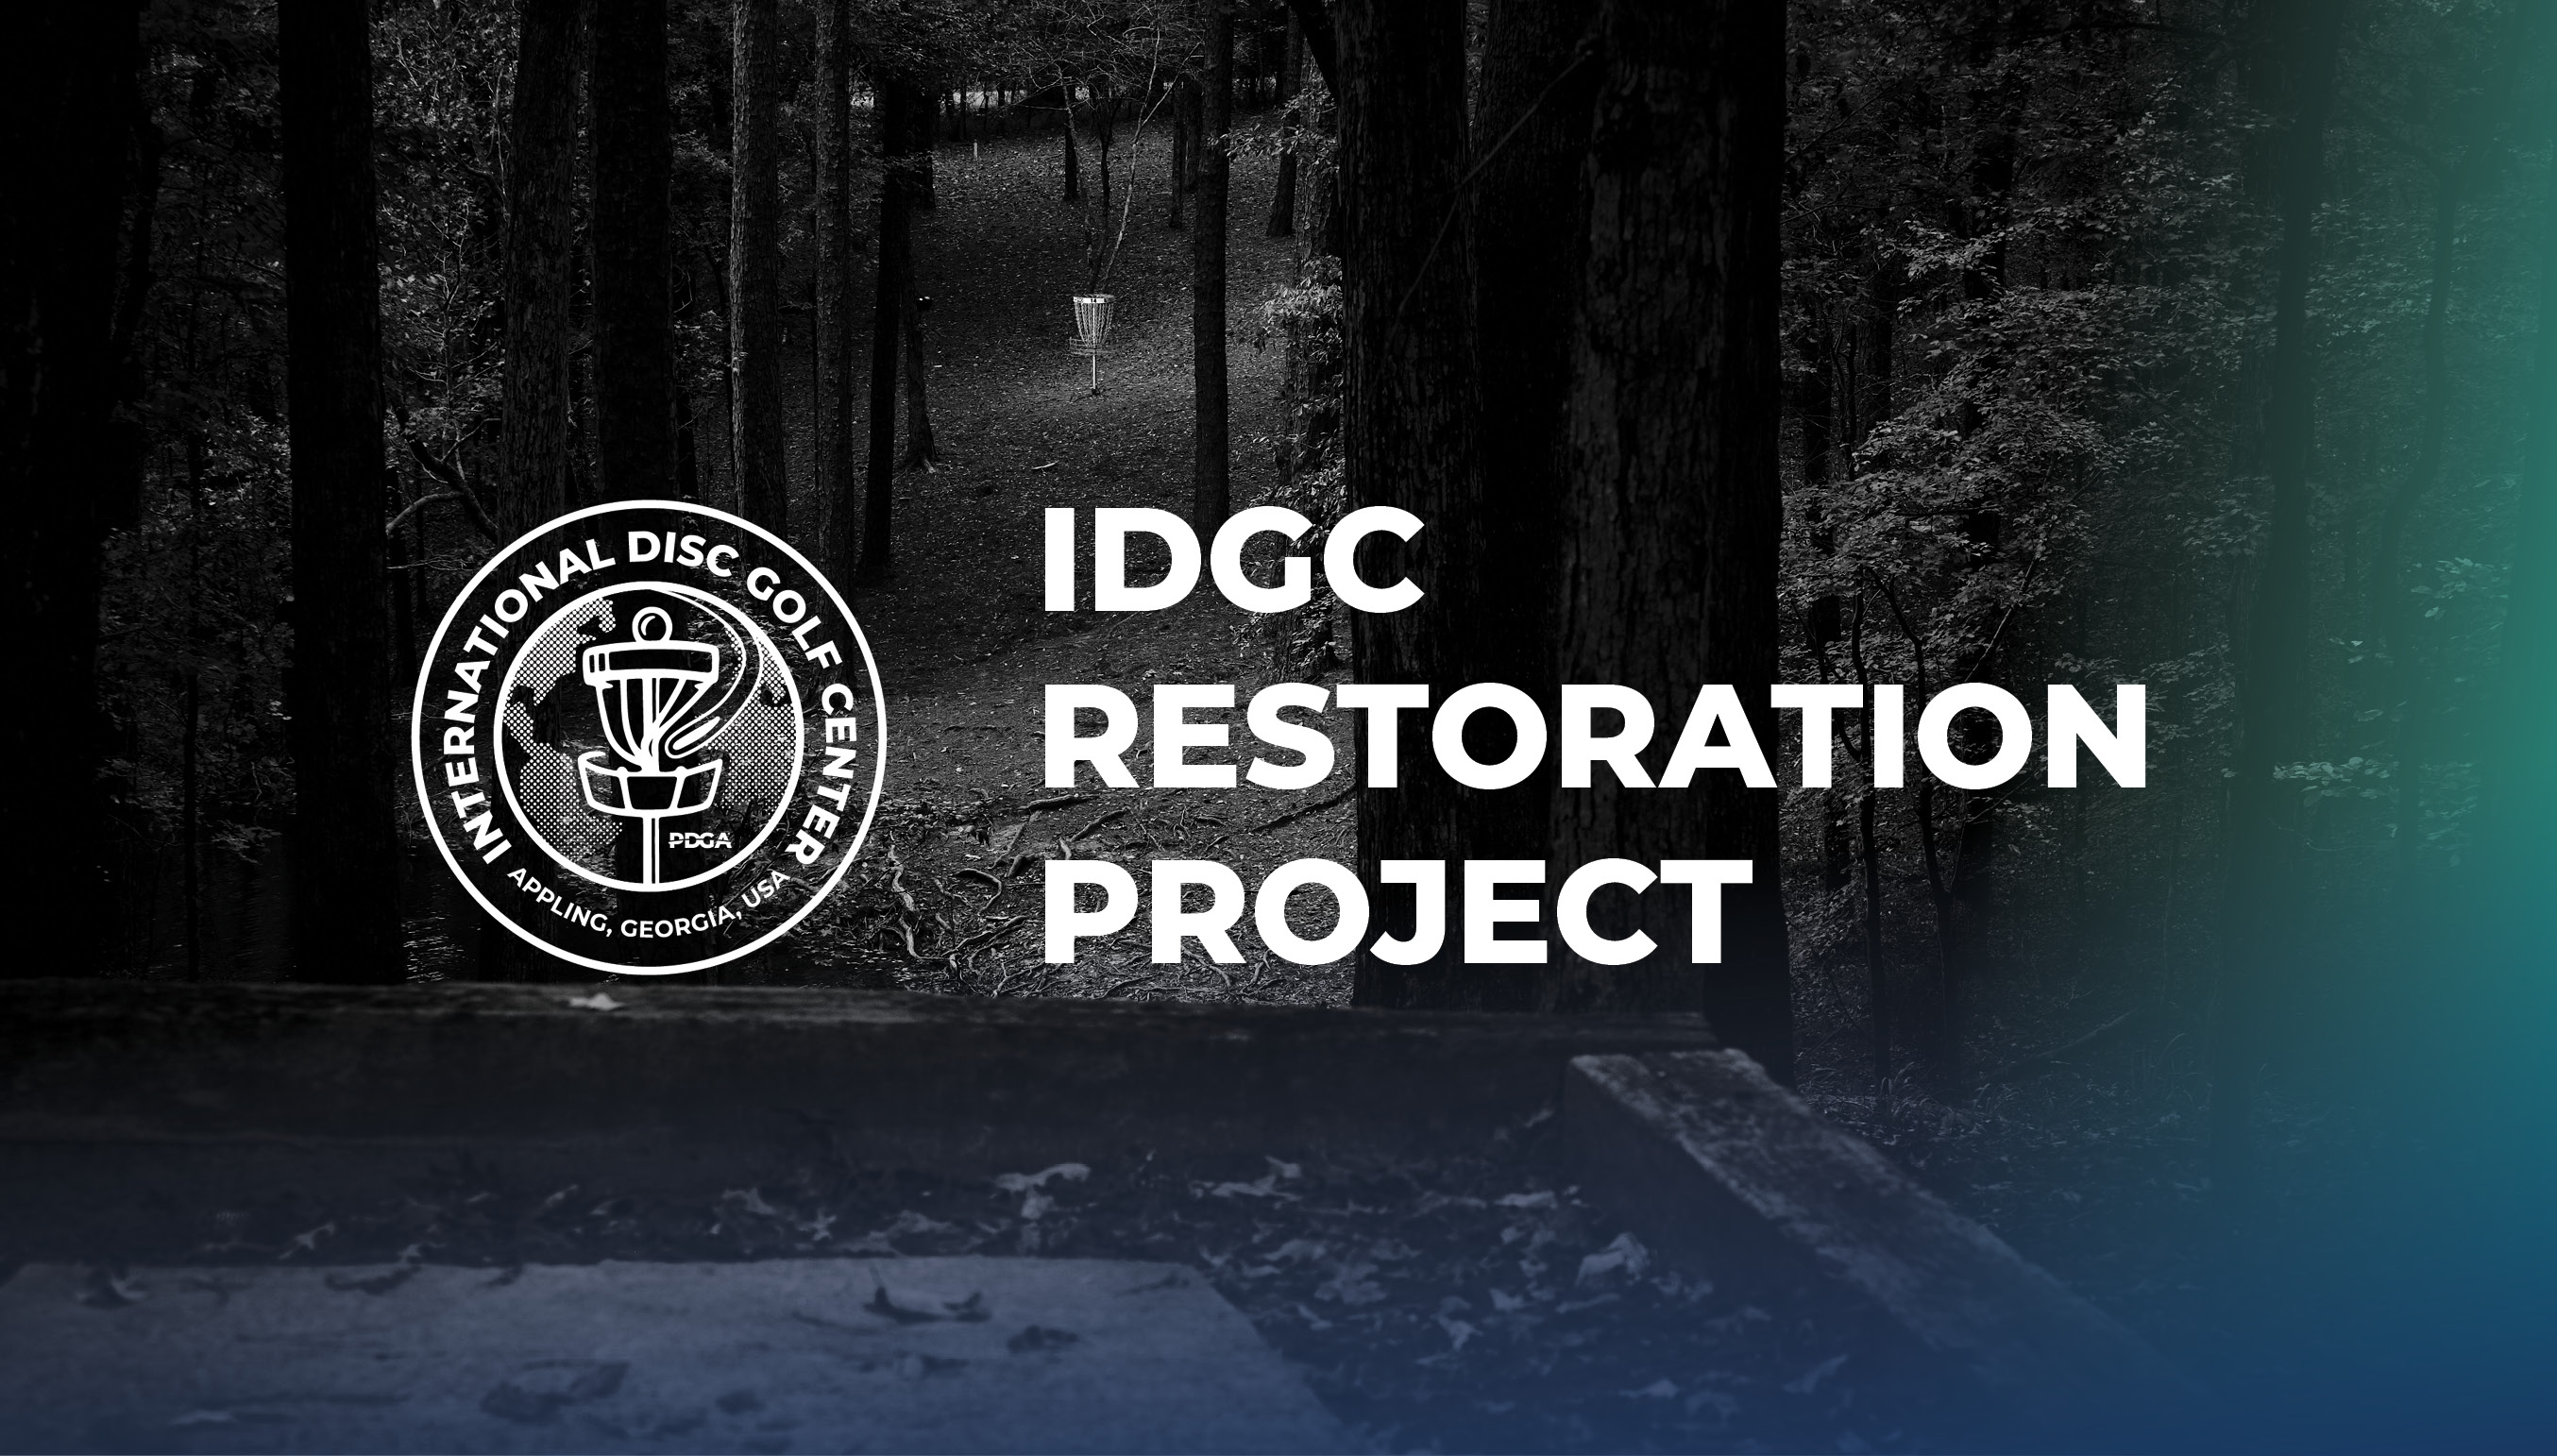 Own a Piece of the IDGC Professional Disc Golf Association